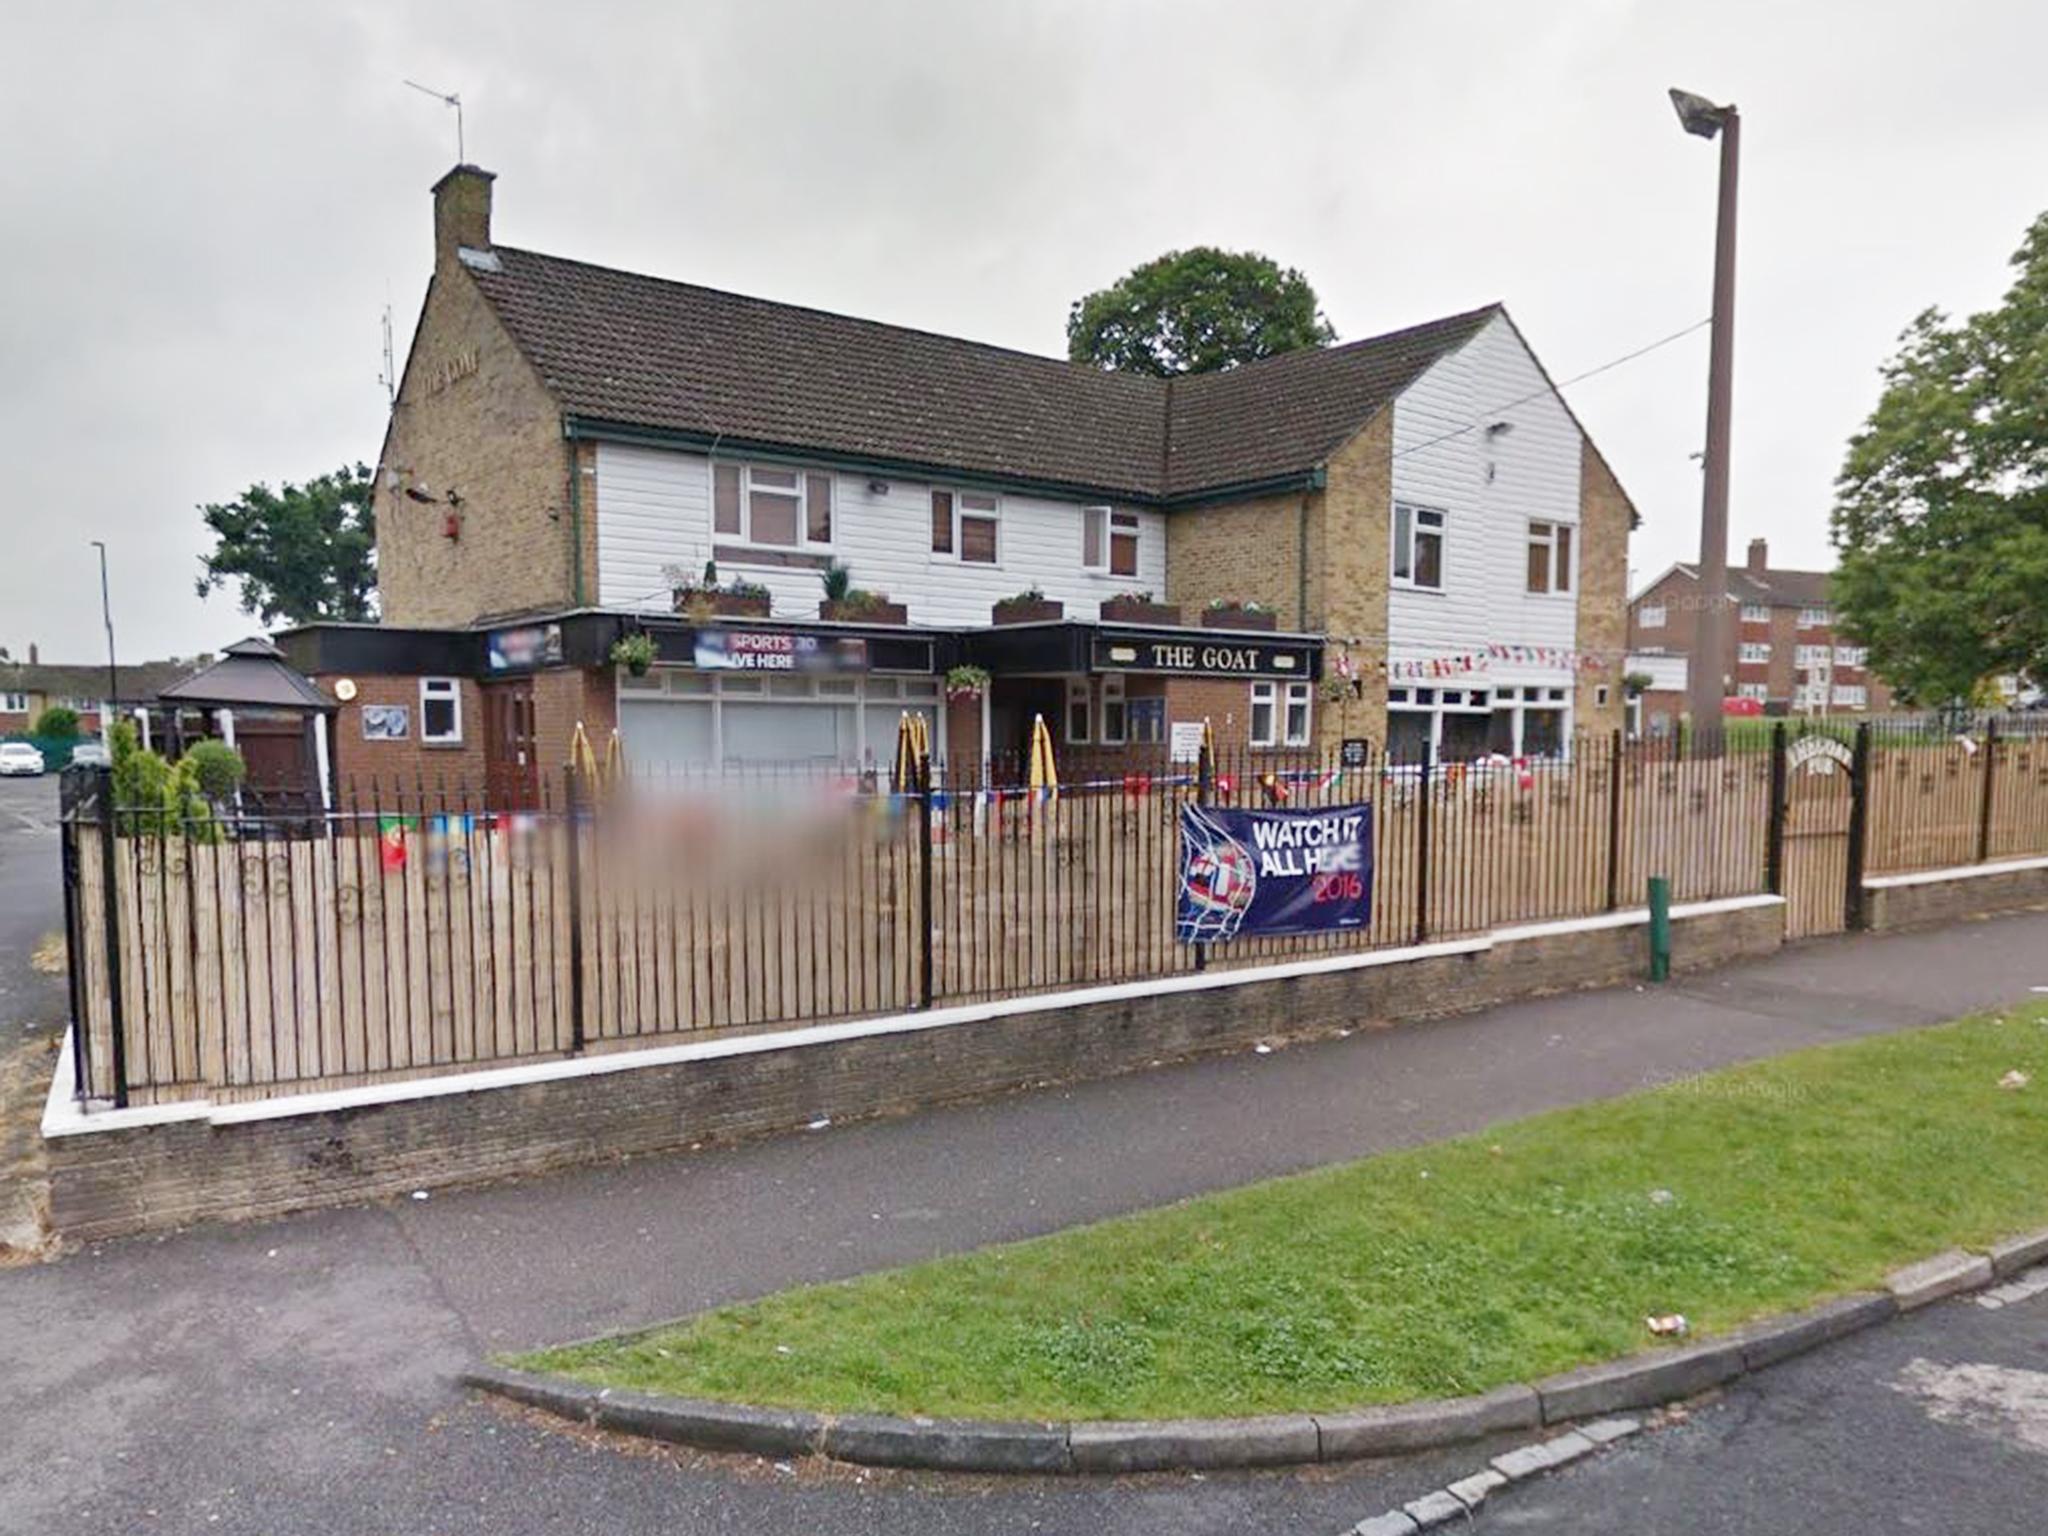 Detectives are investigating whether some of those involved had been drinking in The Goat pub in Croydon